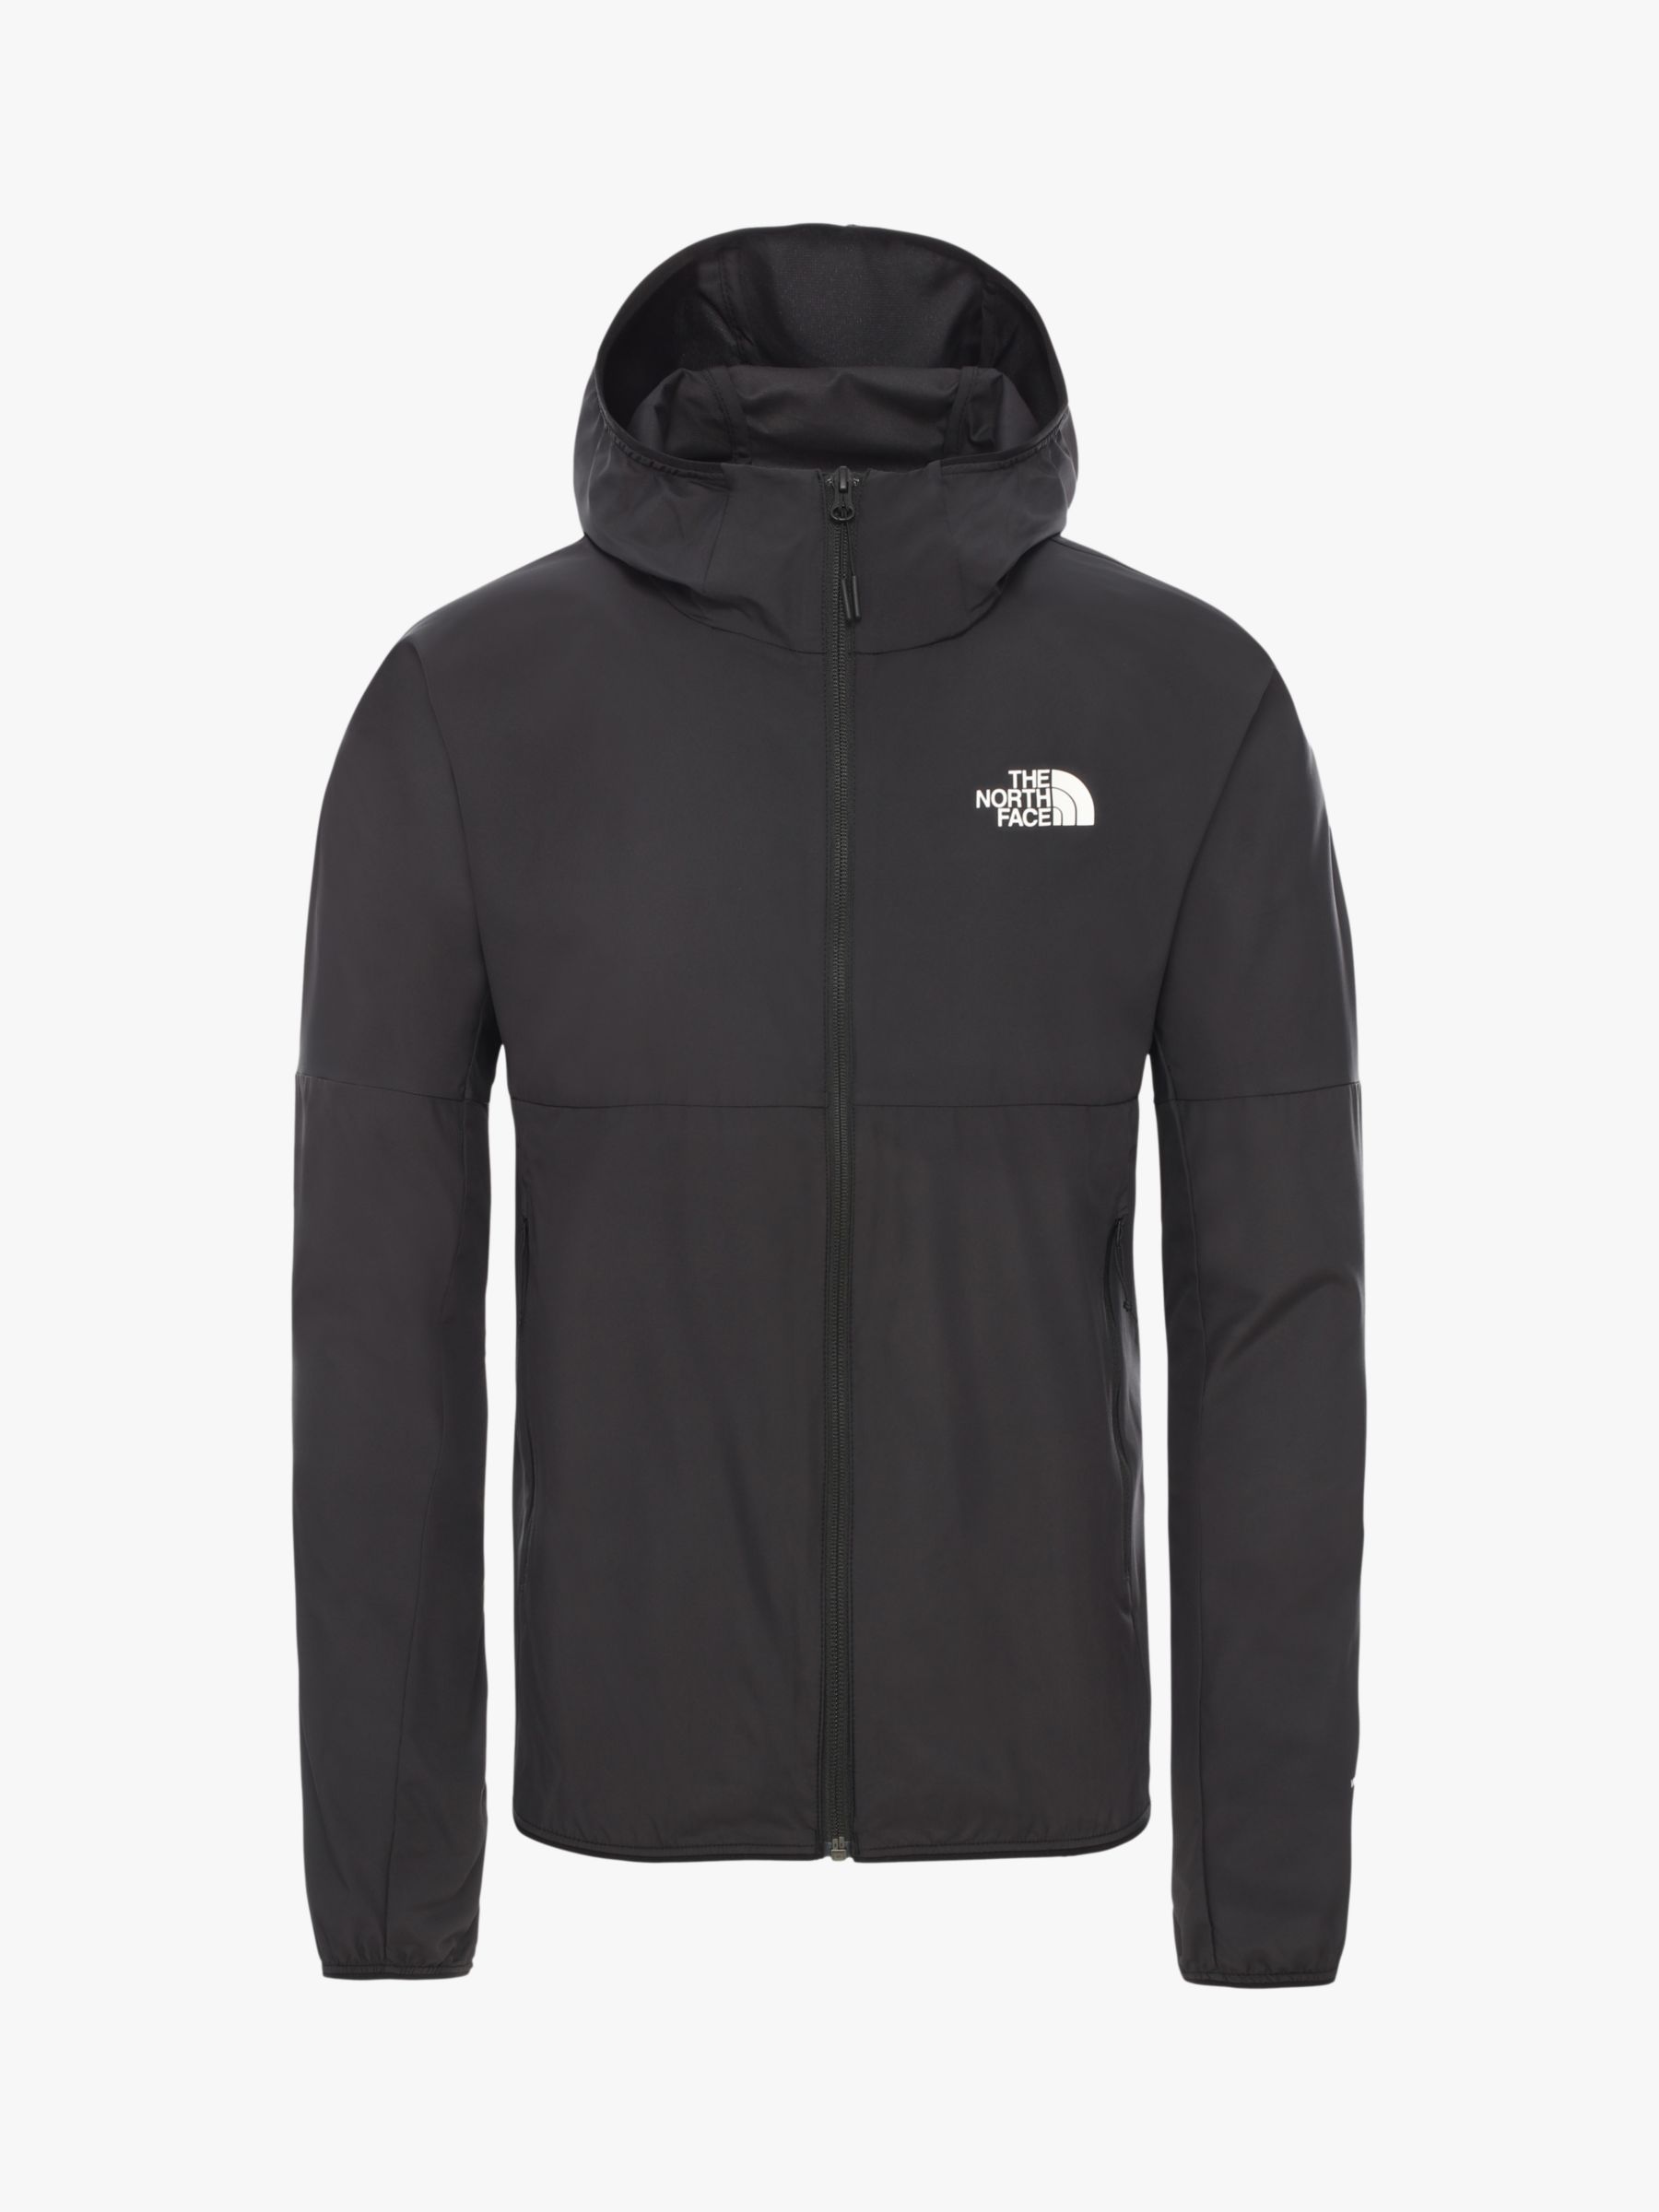 north face flyweight hooded jacket